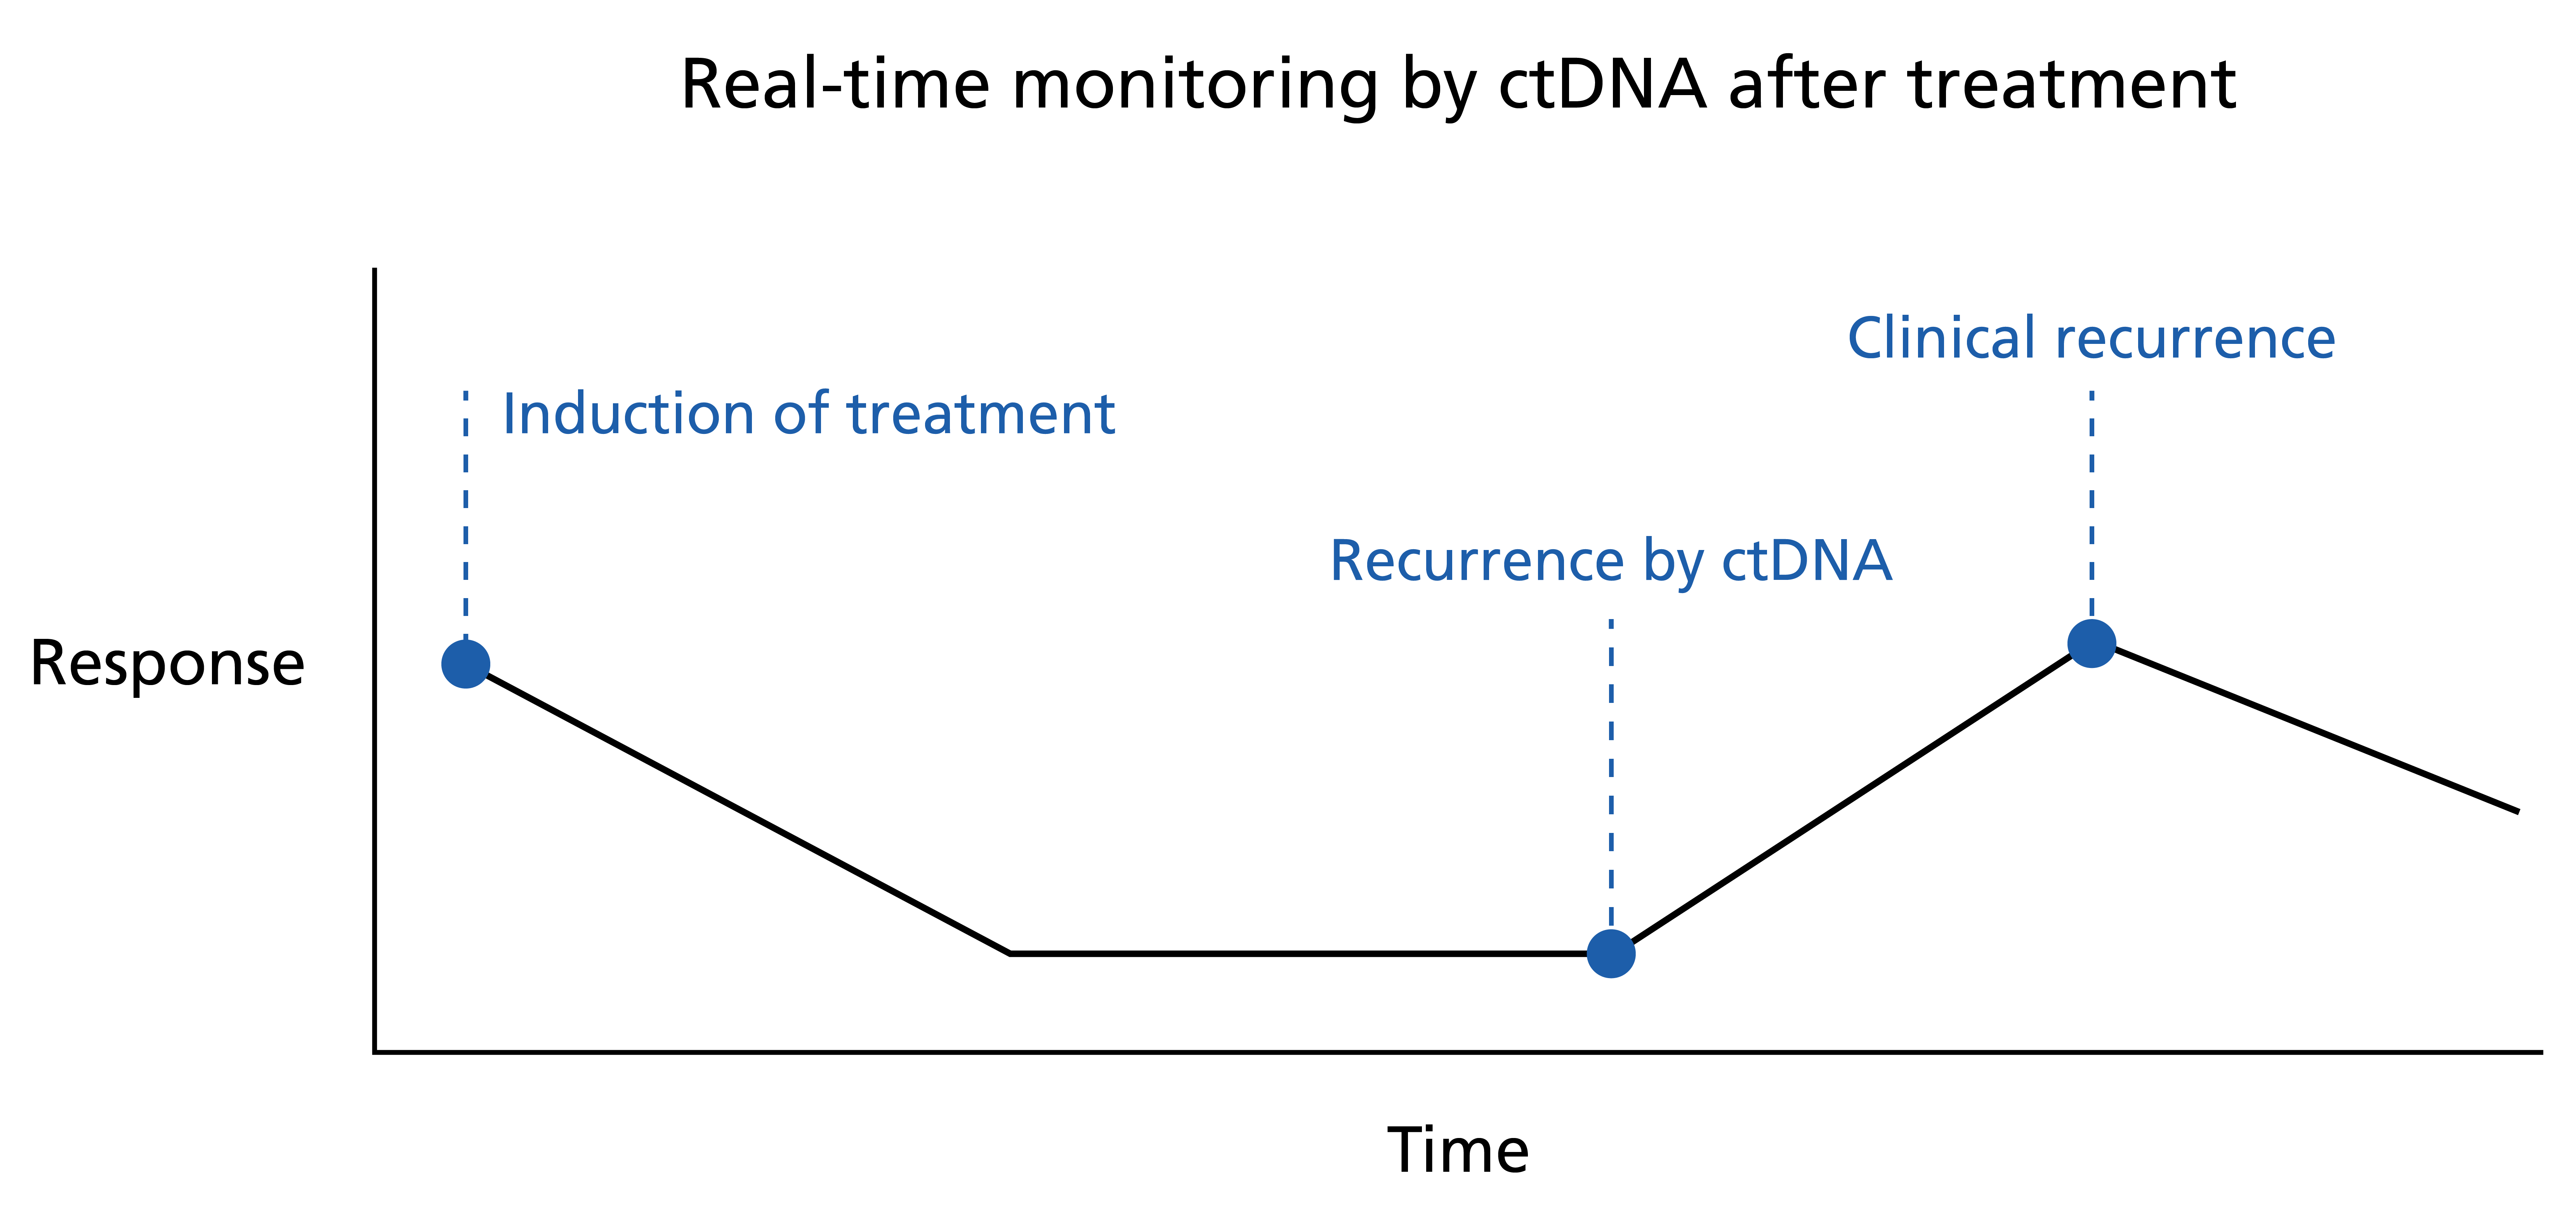 A rise in ctDNA may be seen before clinical evidence of recurrence, presenting an opportunity for early intervention.